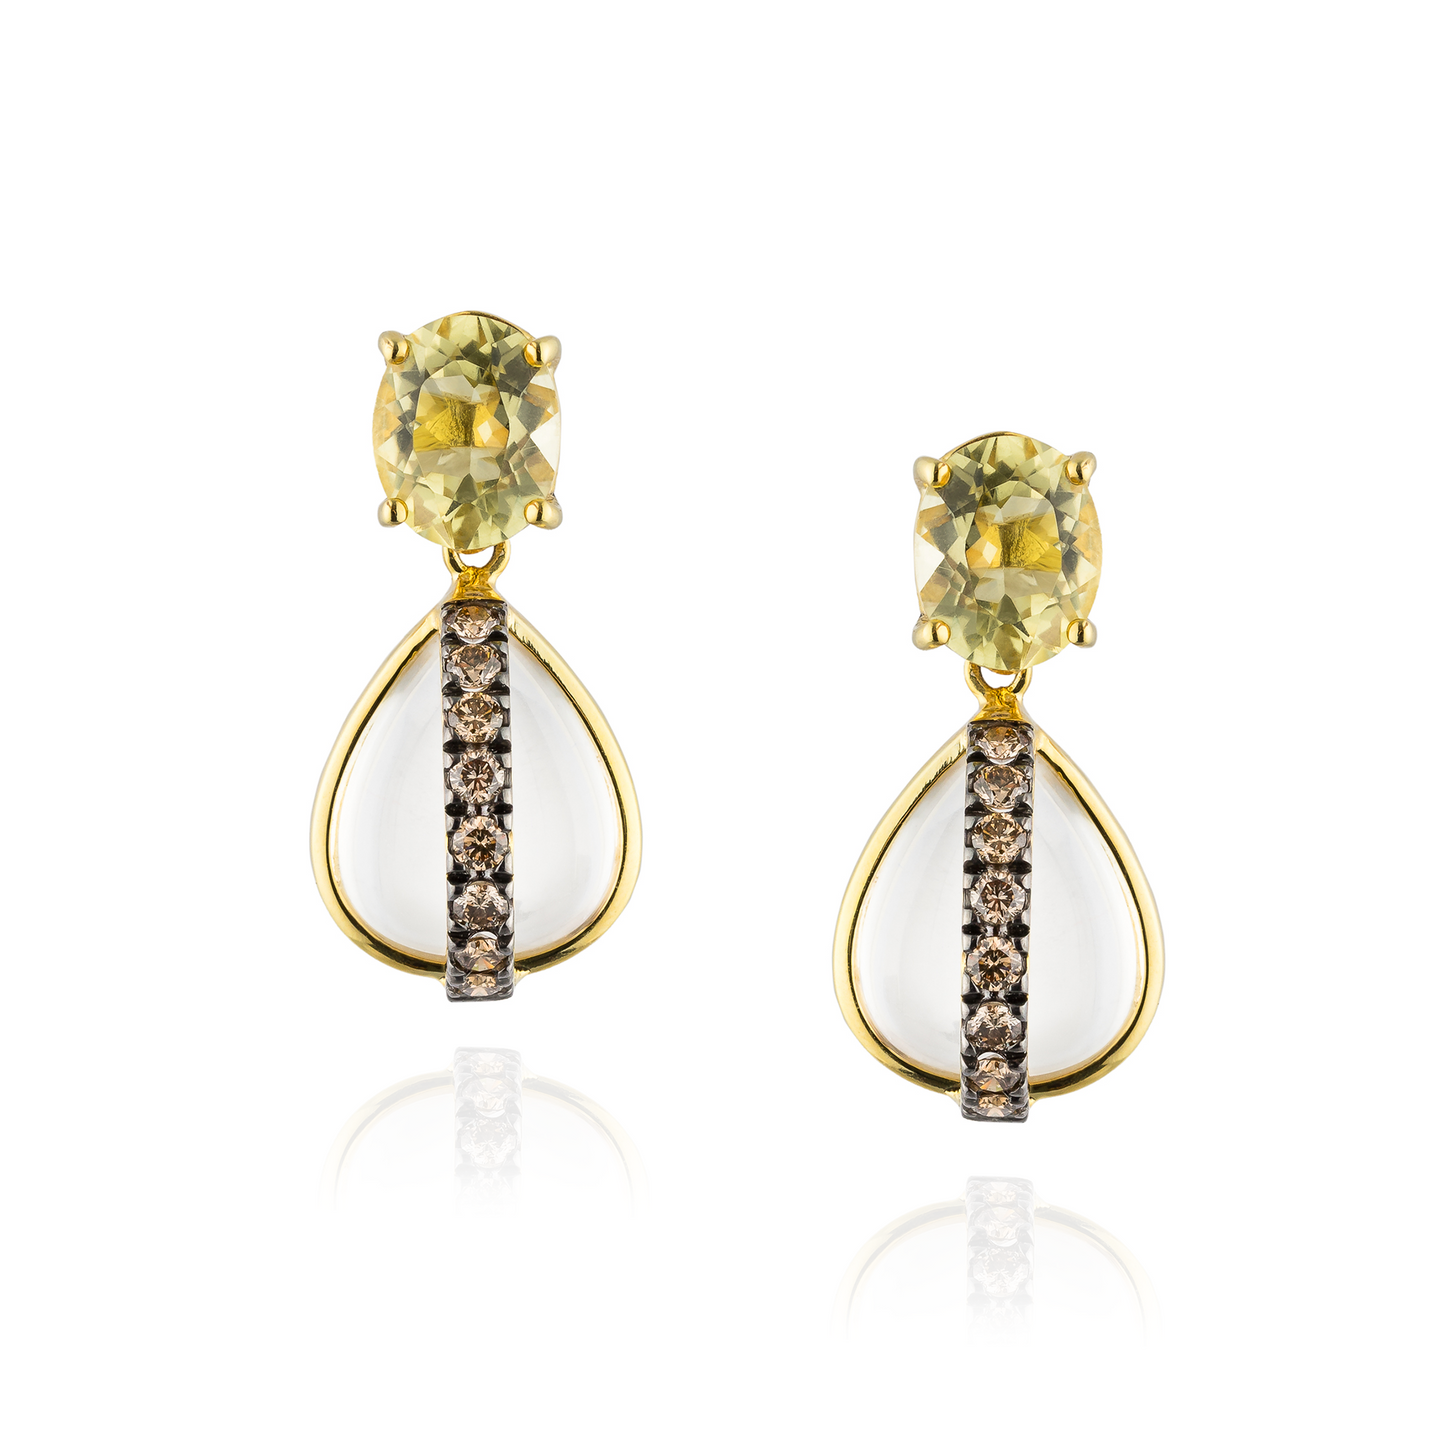 925 Silver  Earrings 18KT Yellow Gold Plated with Faceted Lemon Quartz